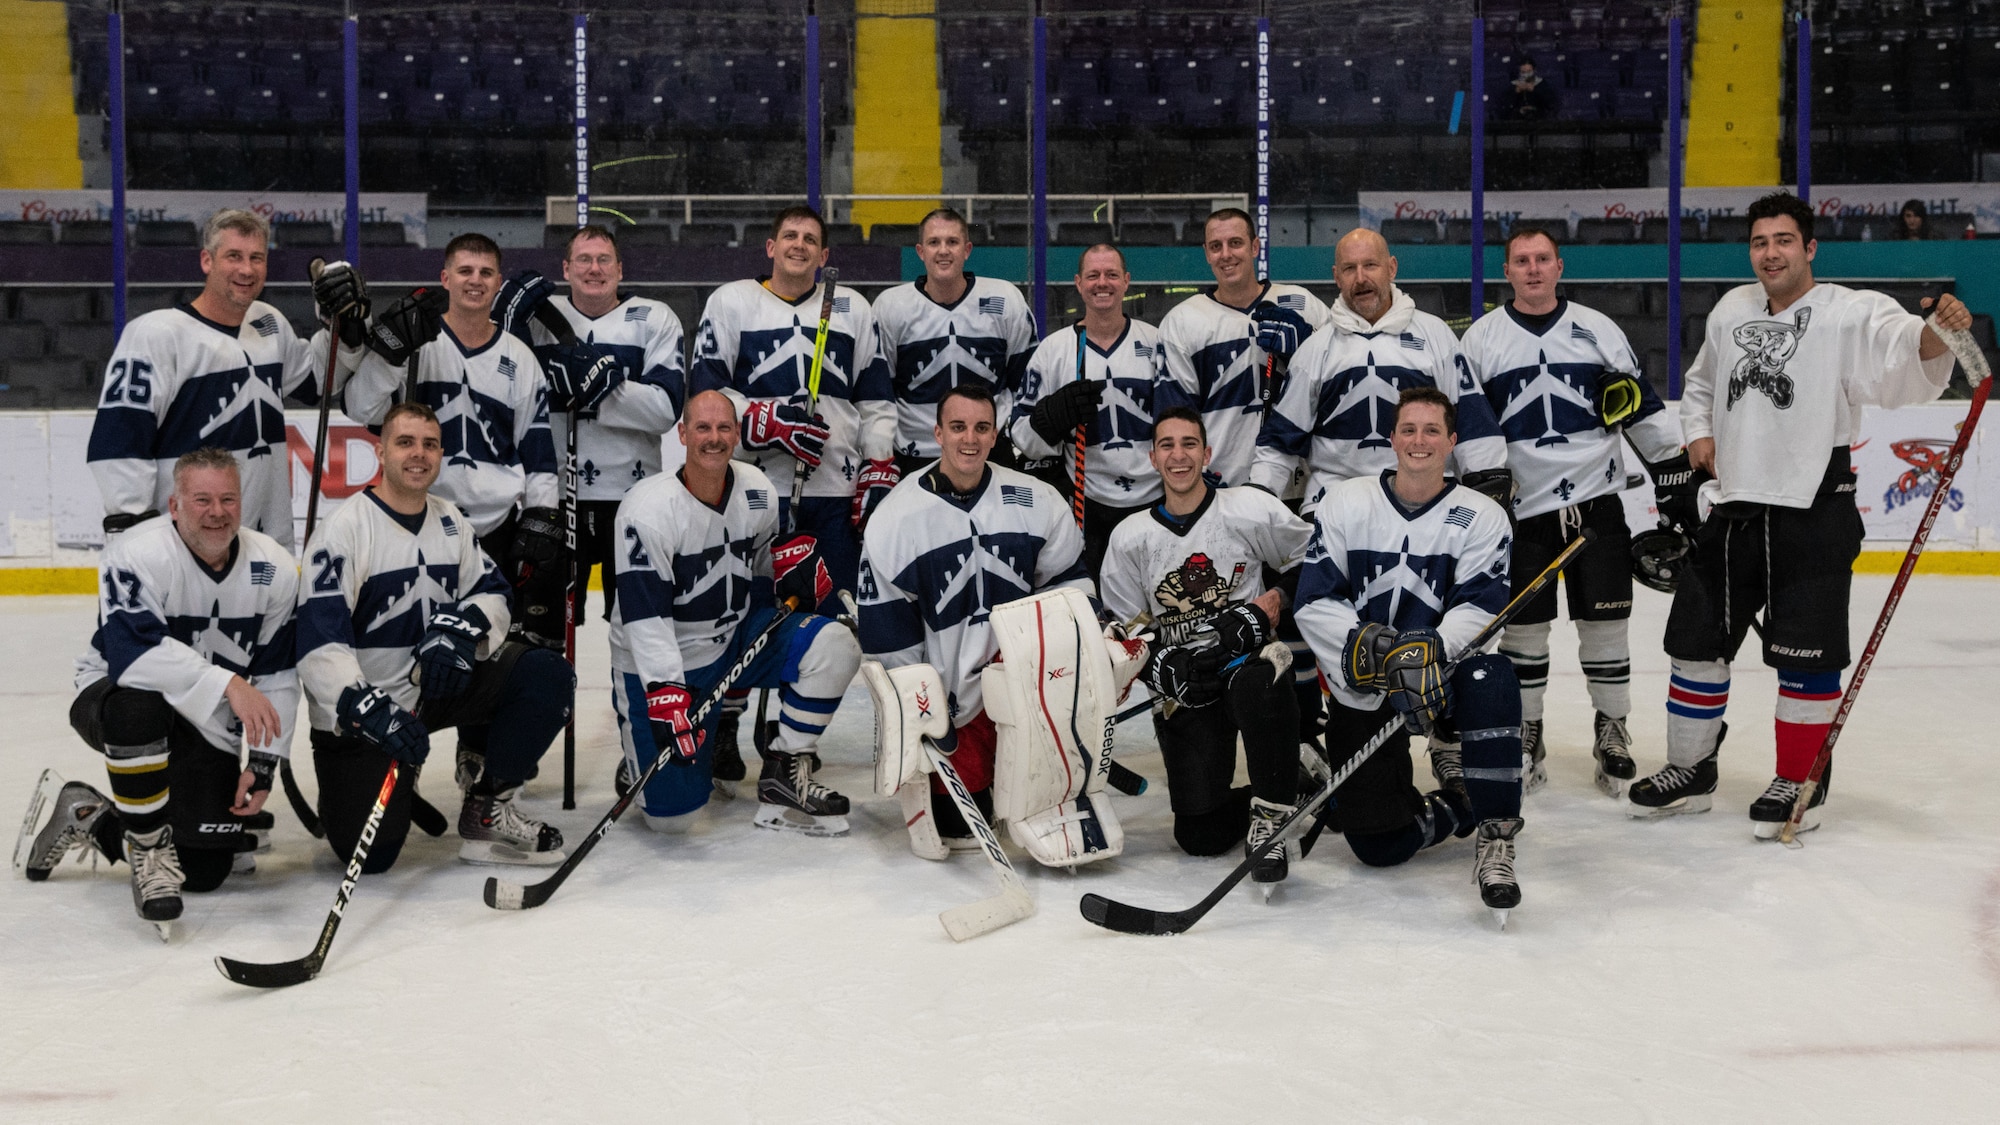 The Barksdale Bombers hockey team from Barksdale Air Force Base, Louisiana, pose for a group photo in the Hirsch Memorial Coliseum at Shreveport, Louisiana, March 31, 2021.